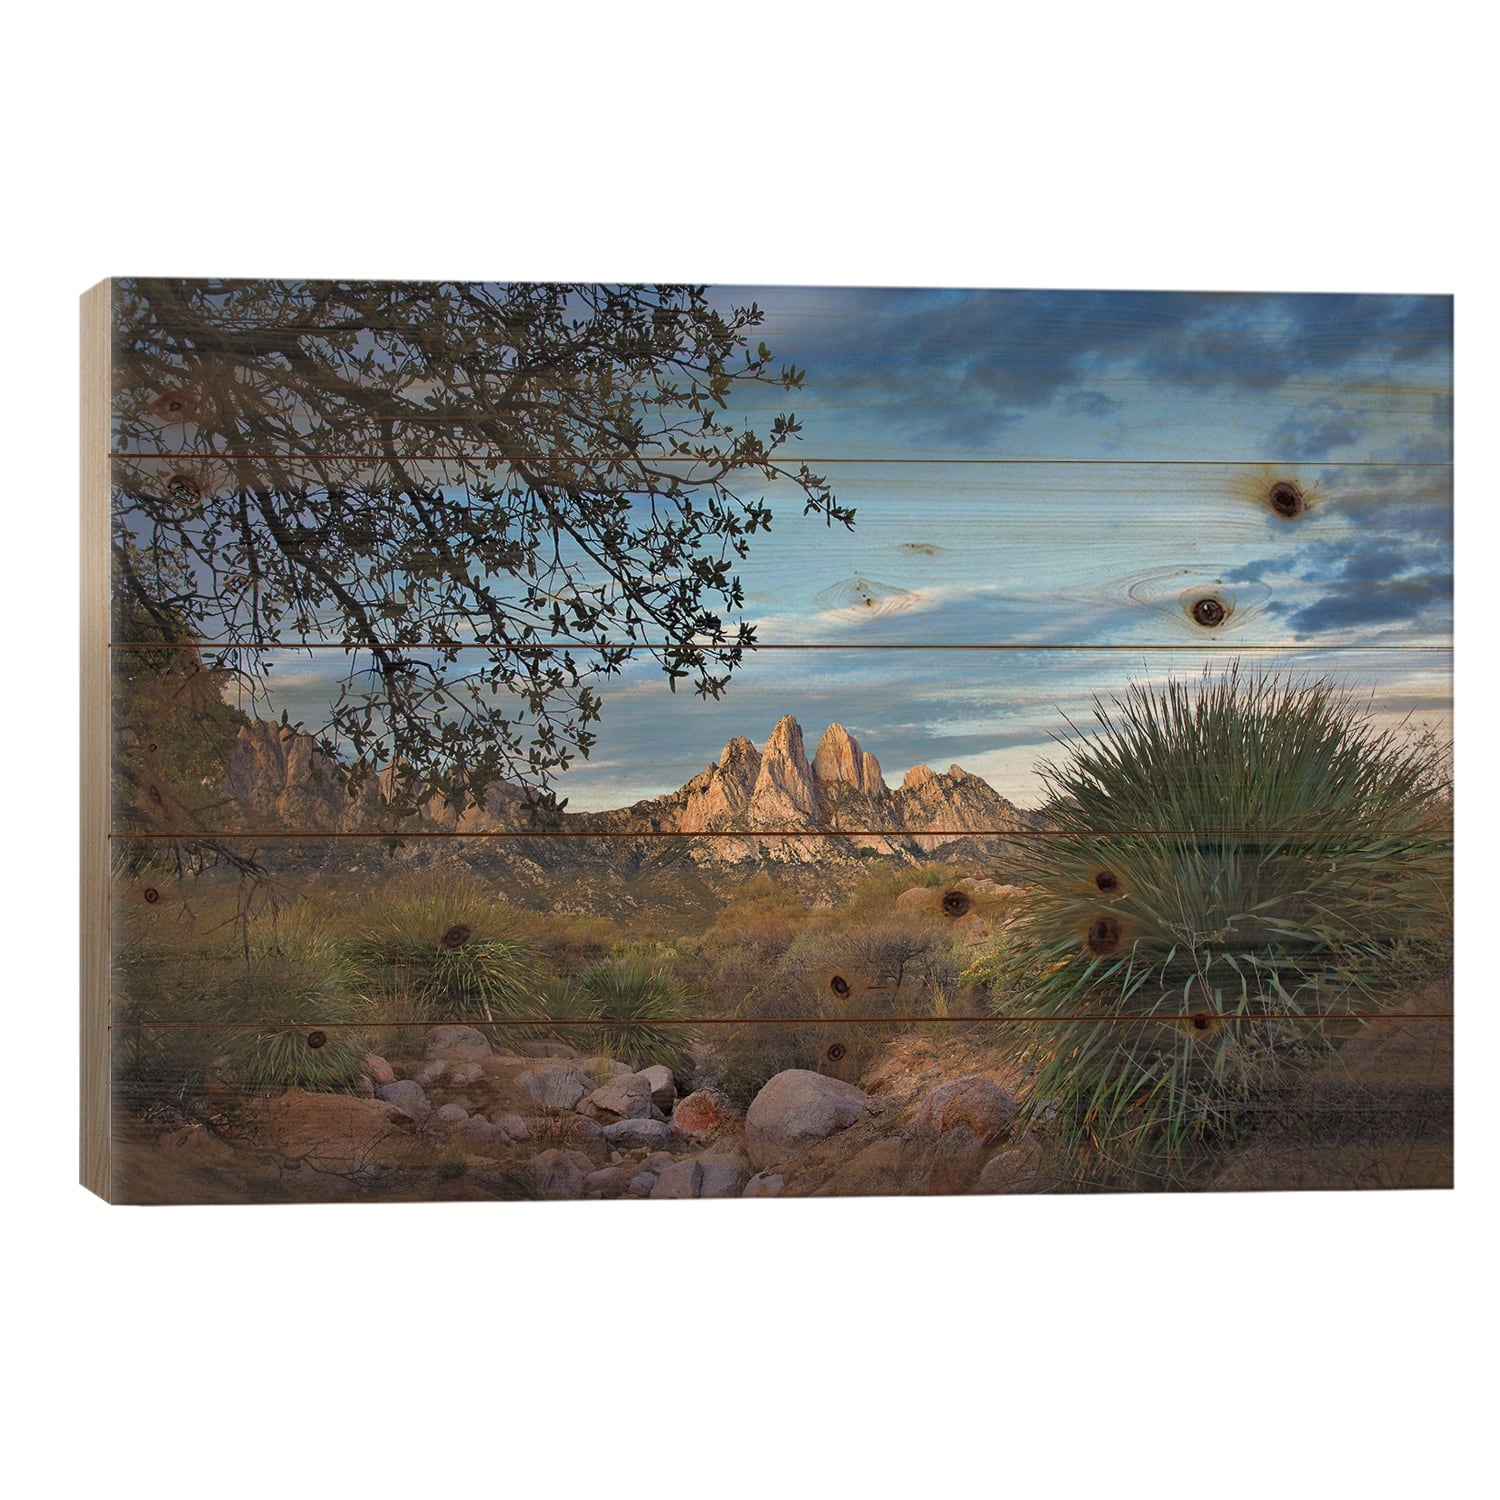 Organ Mountains Near Las Cruces, New Mexico I Print On Wood by Tim ...